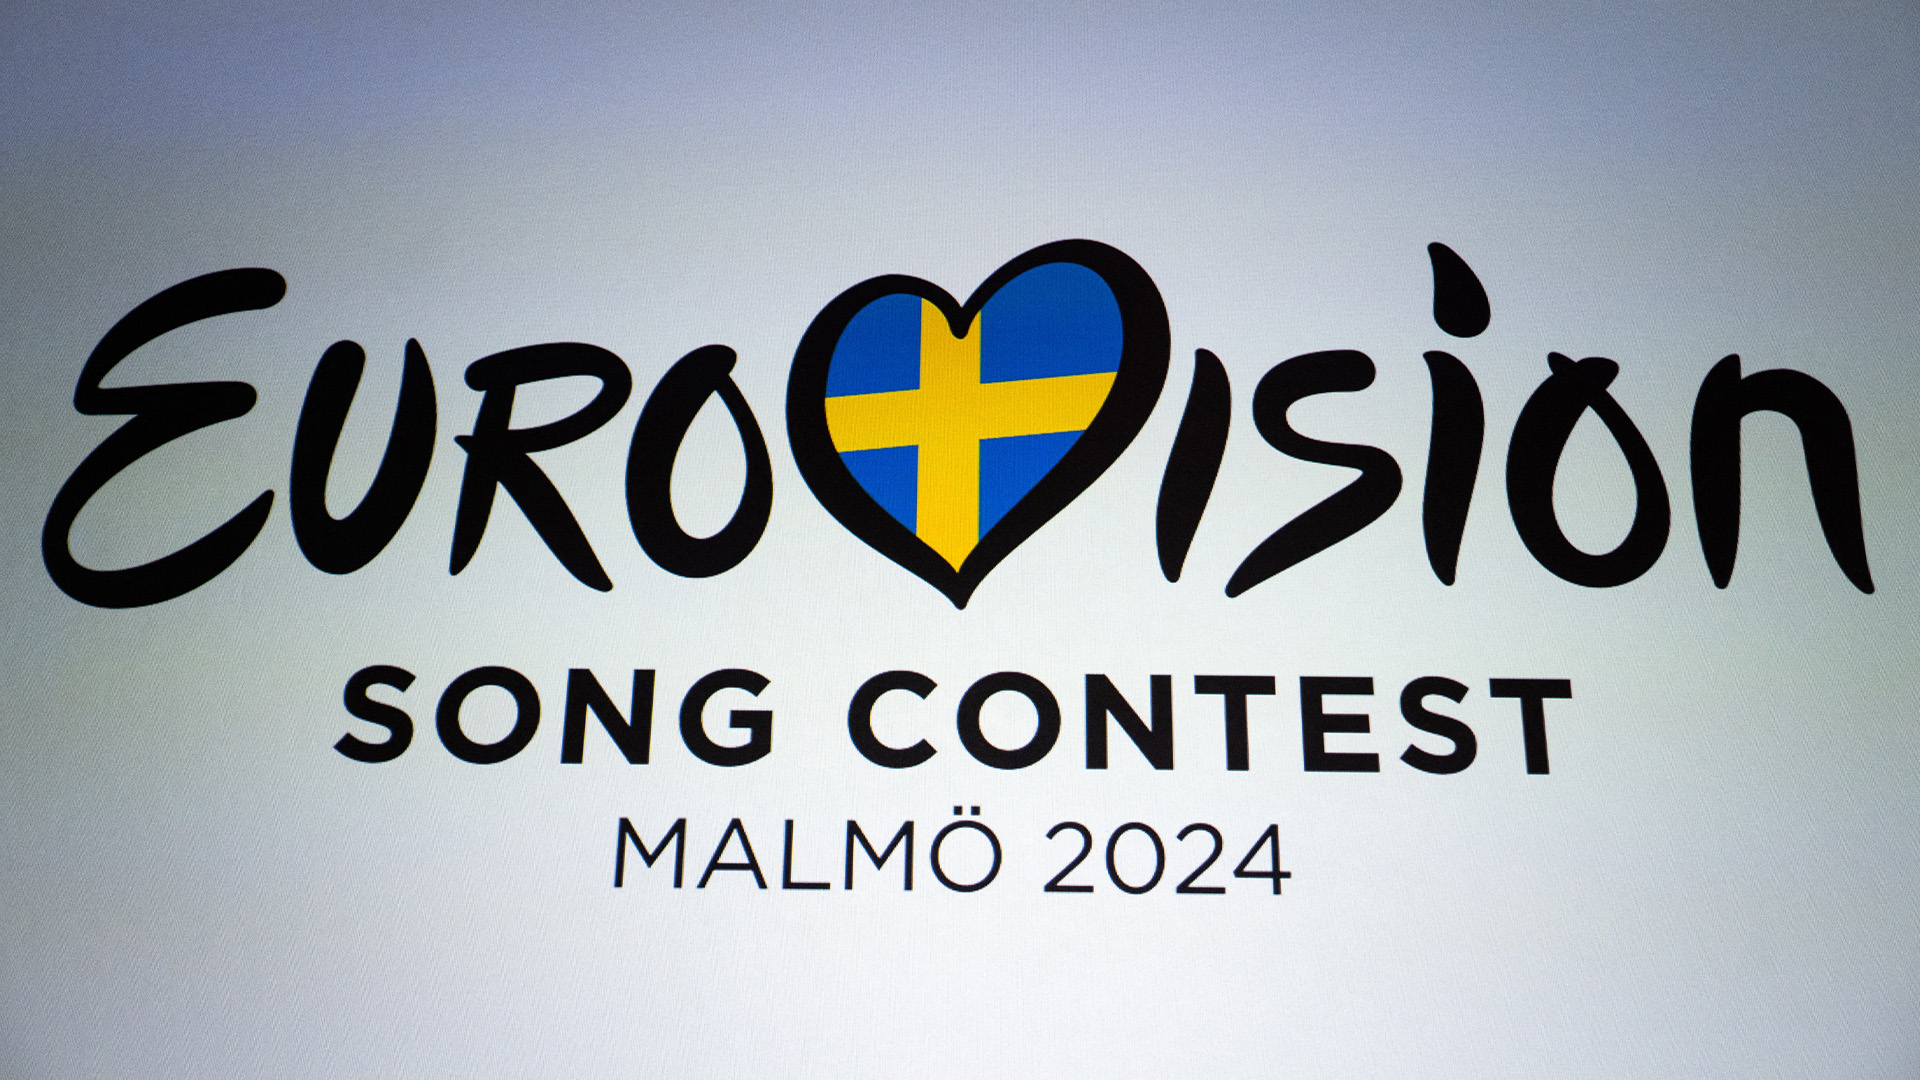 How to watch Eurovision 2024: A guide to the singing competition [Video]